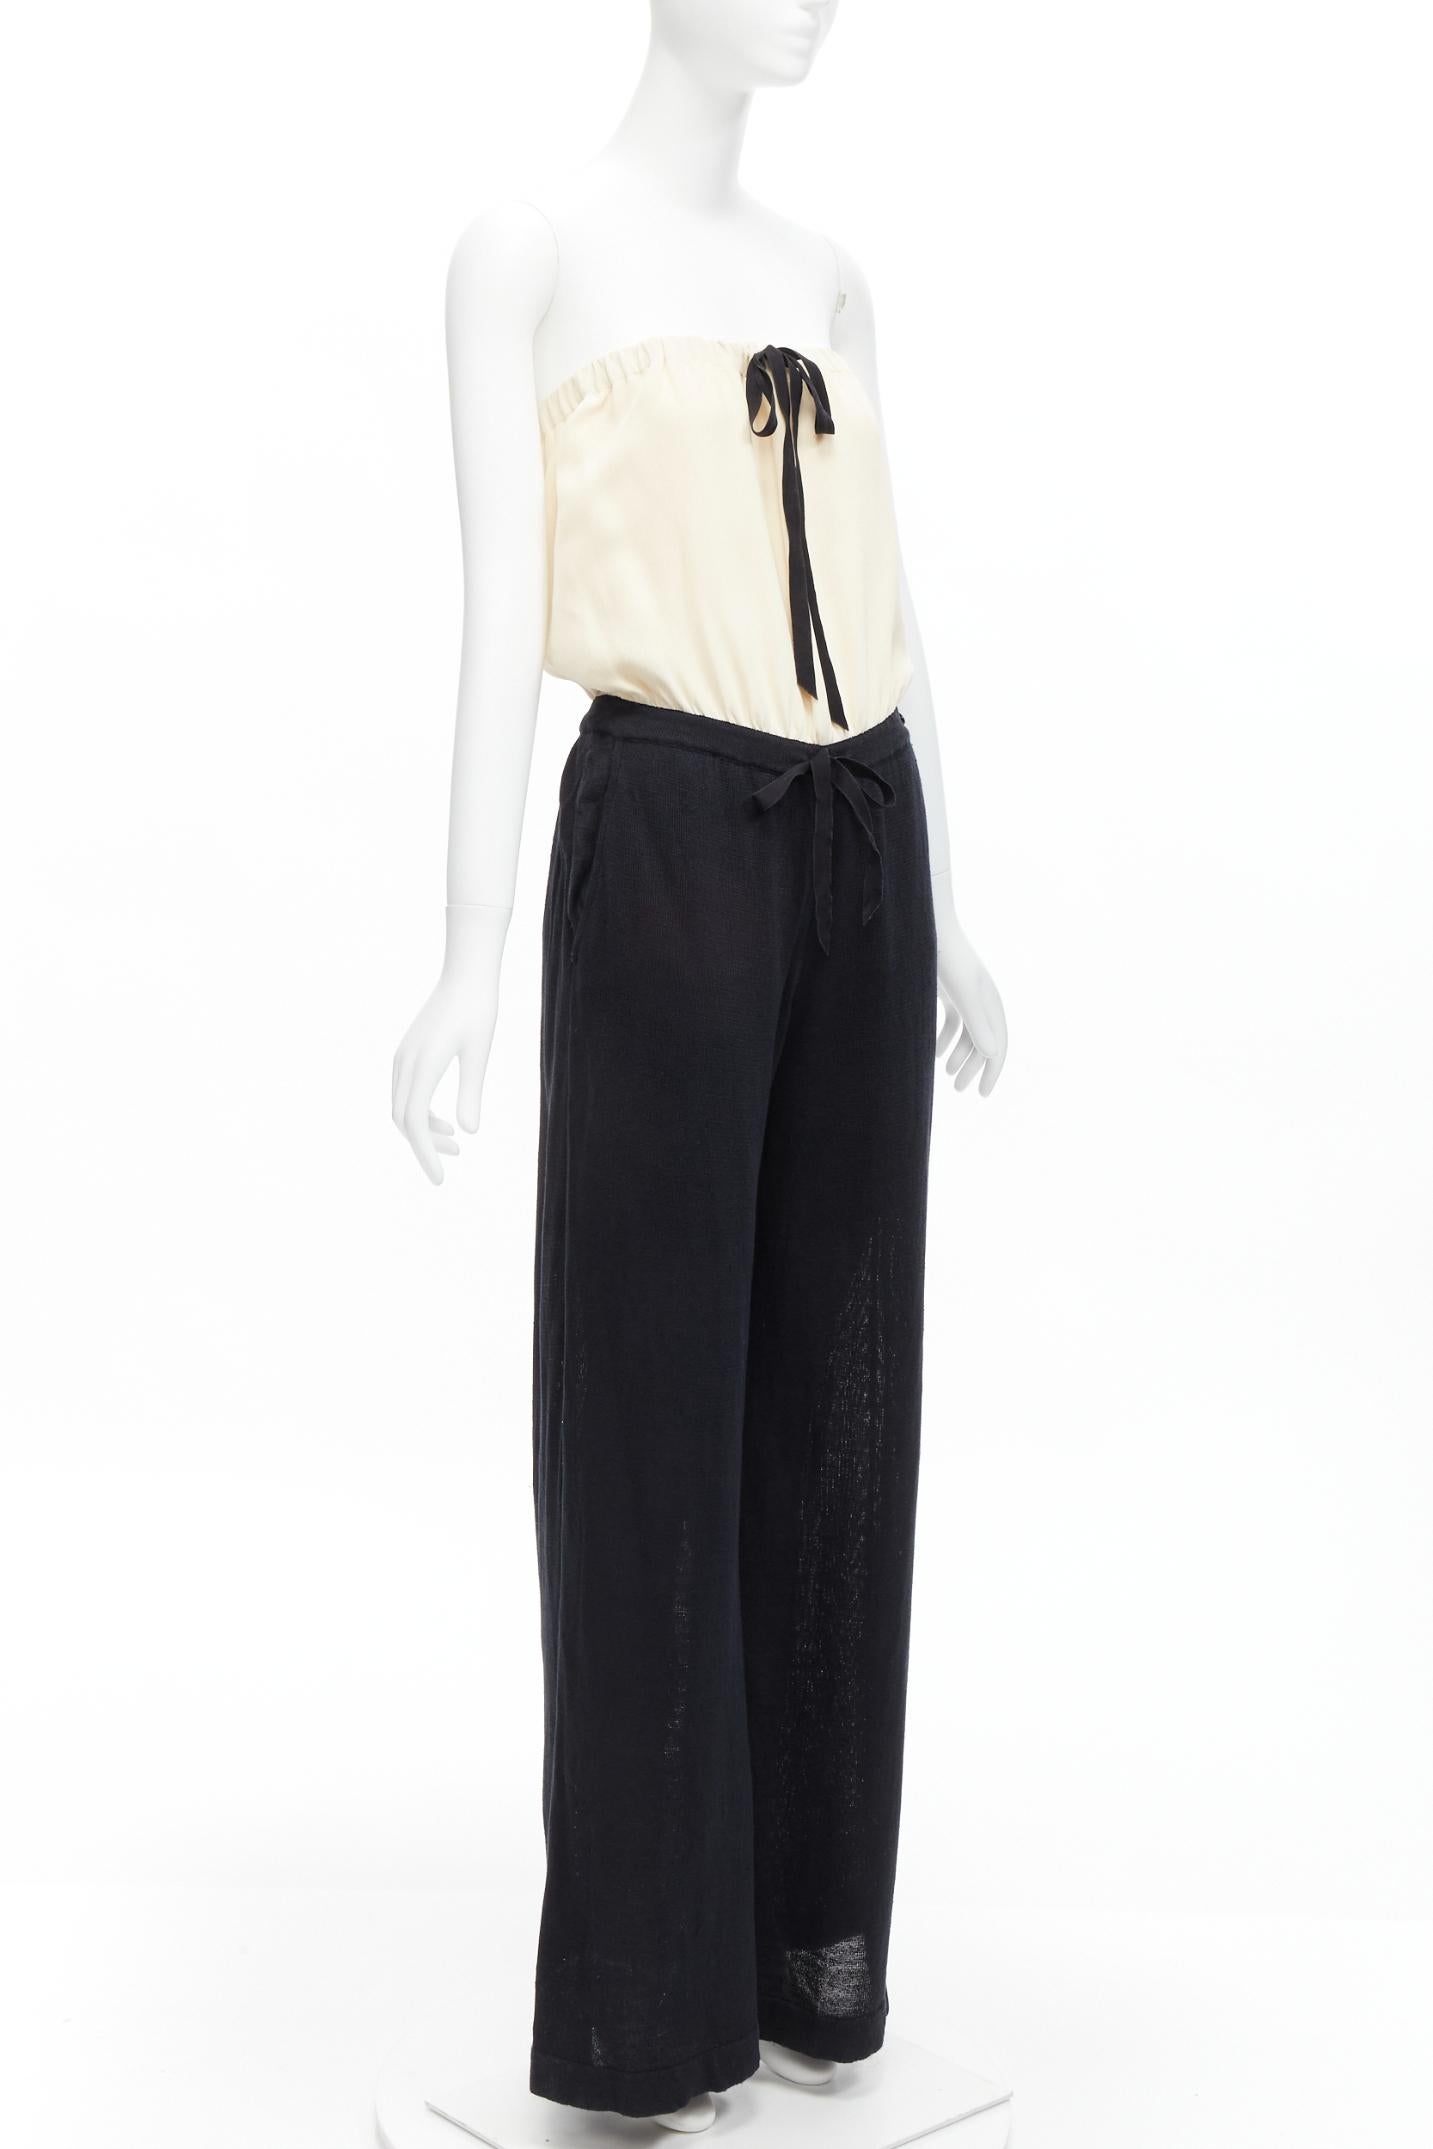 CHANEL CC resin button black beige linen strapless wide leg jumpsuit FR40 L
Reference: TGAS/D00081
Brand: Chanel
Designer: Karl Lagerfeld
Material: Linen, Polyamide
Color: Cream, Black
Pattern: Solid
Closure: Elasticated
Lining: Black Silk
Extra